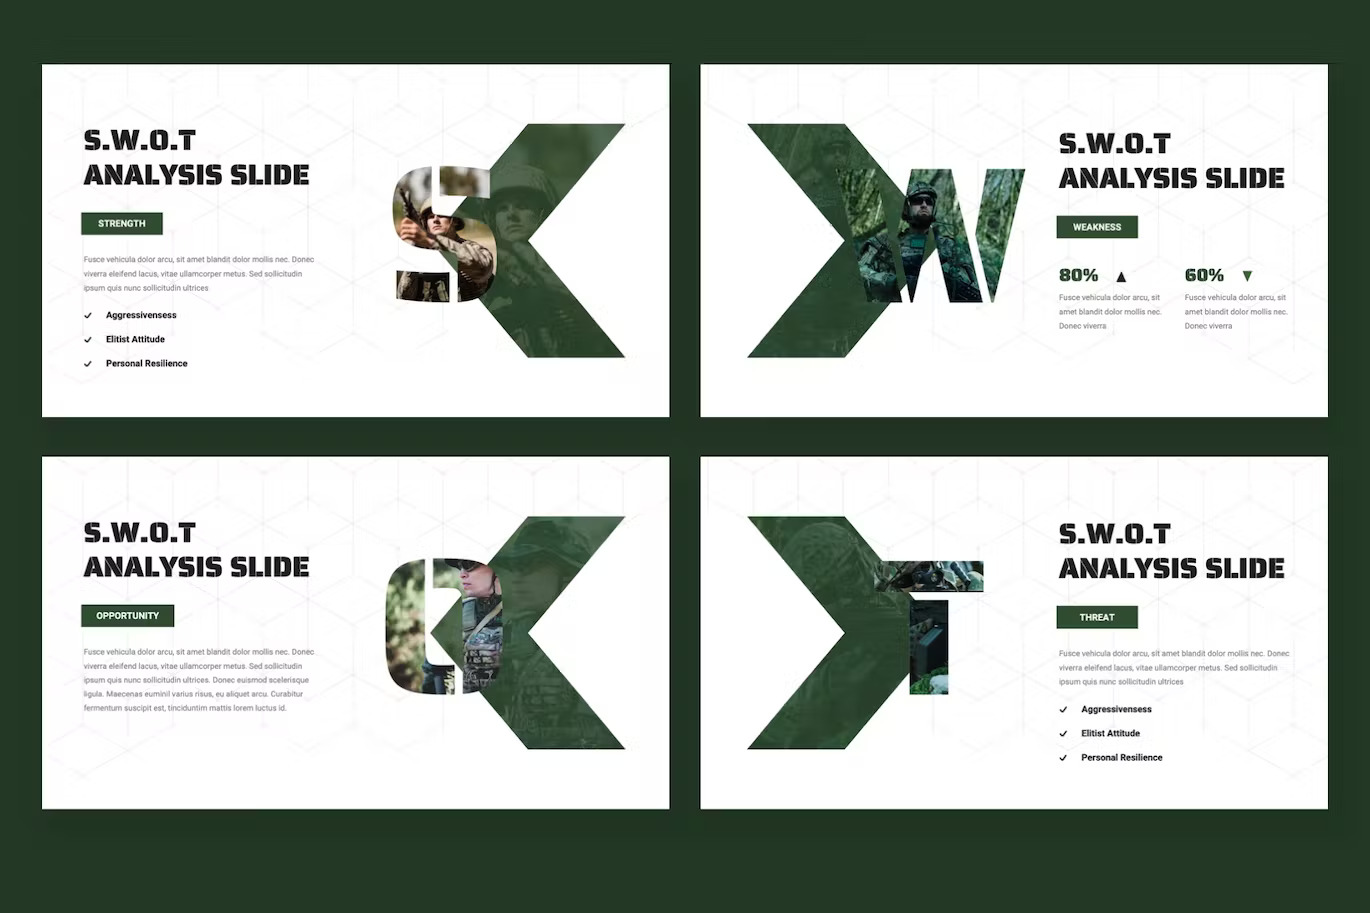 4 different white and dark green slides of SWOT analysis.